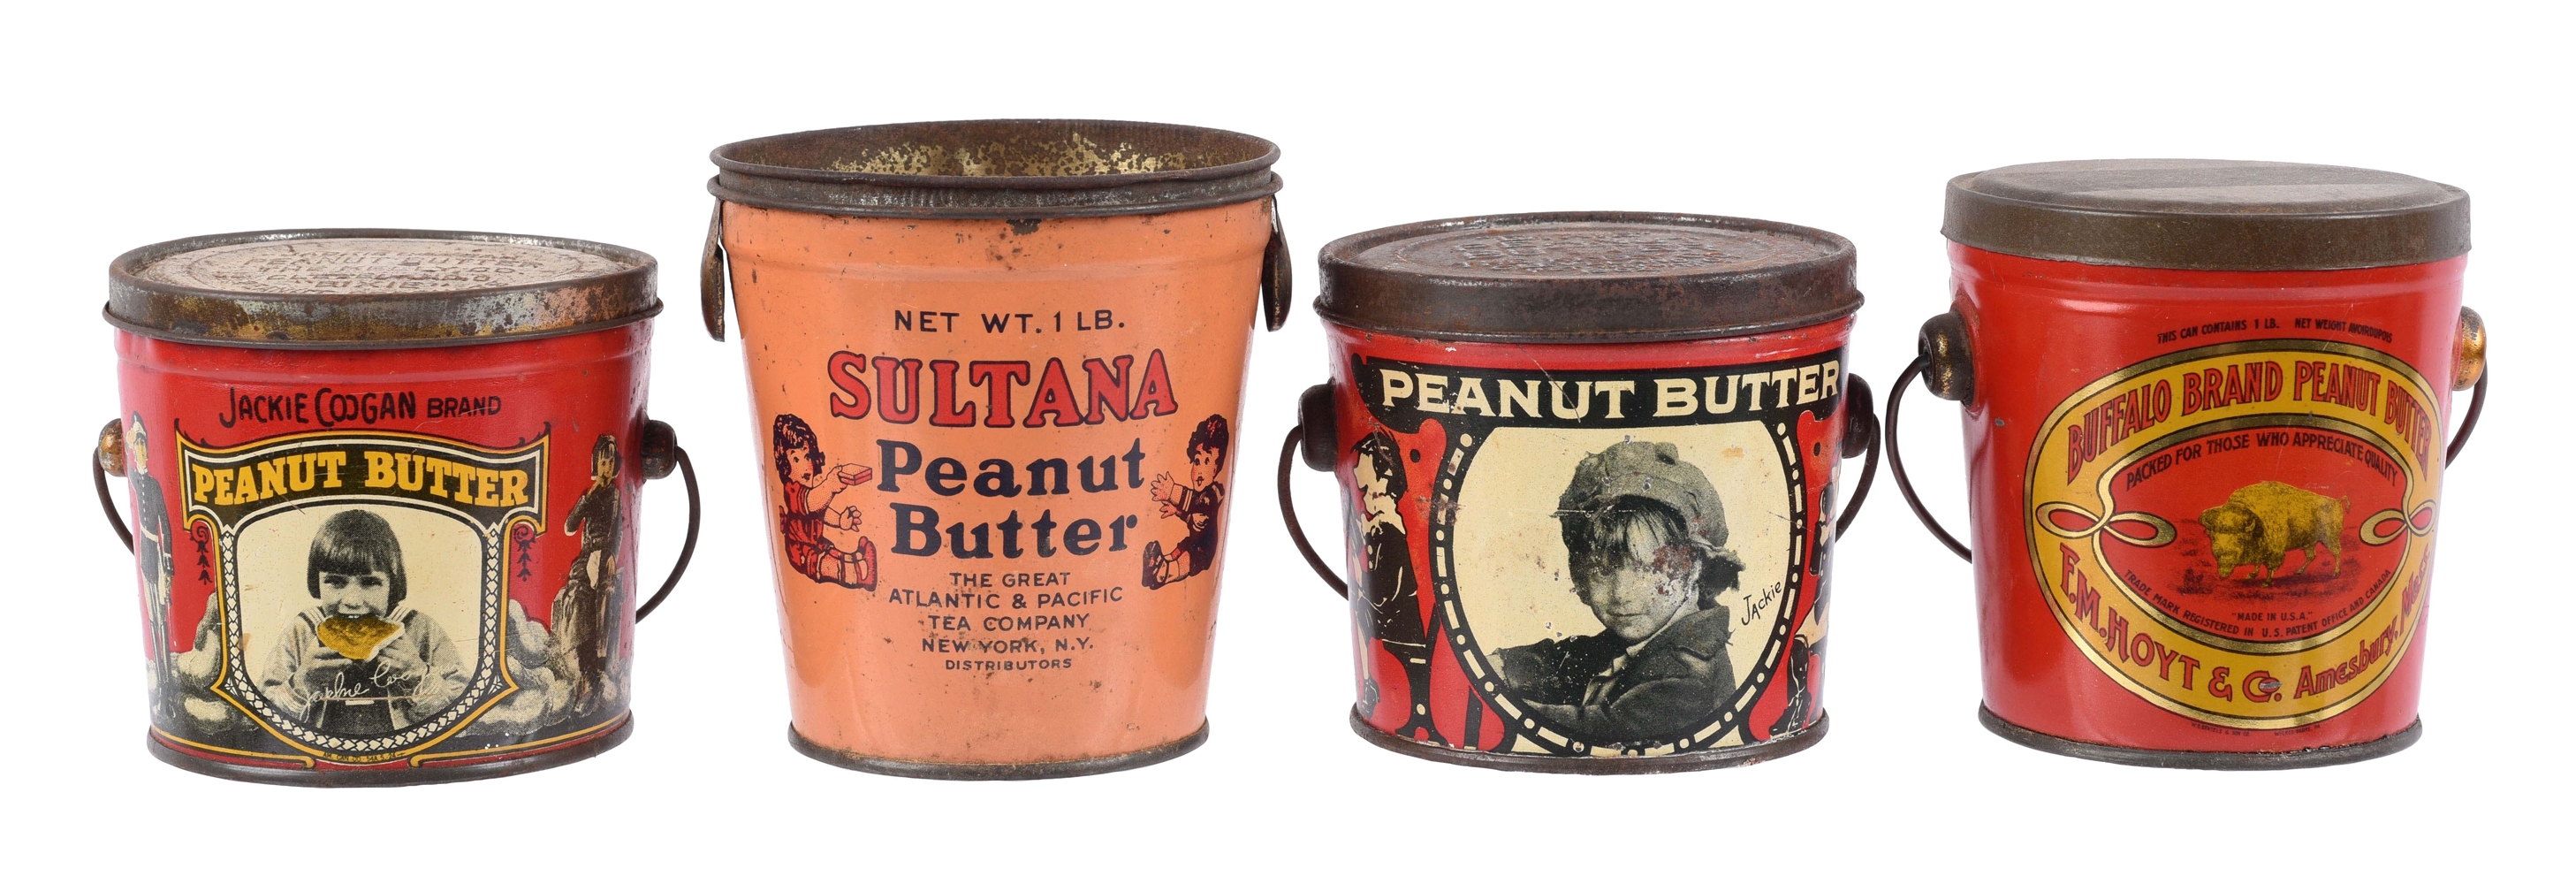 LOT OF 4: PEANUT BUTTER TINS.